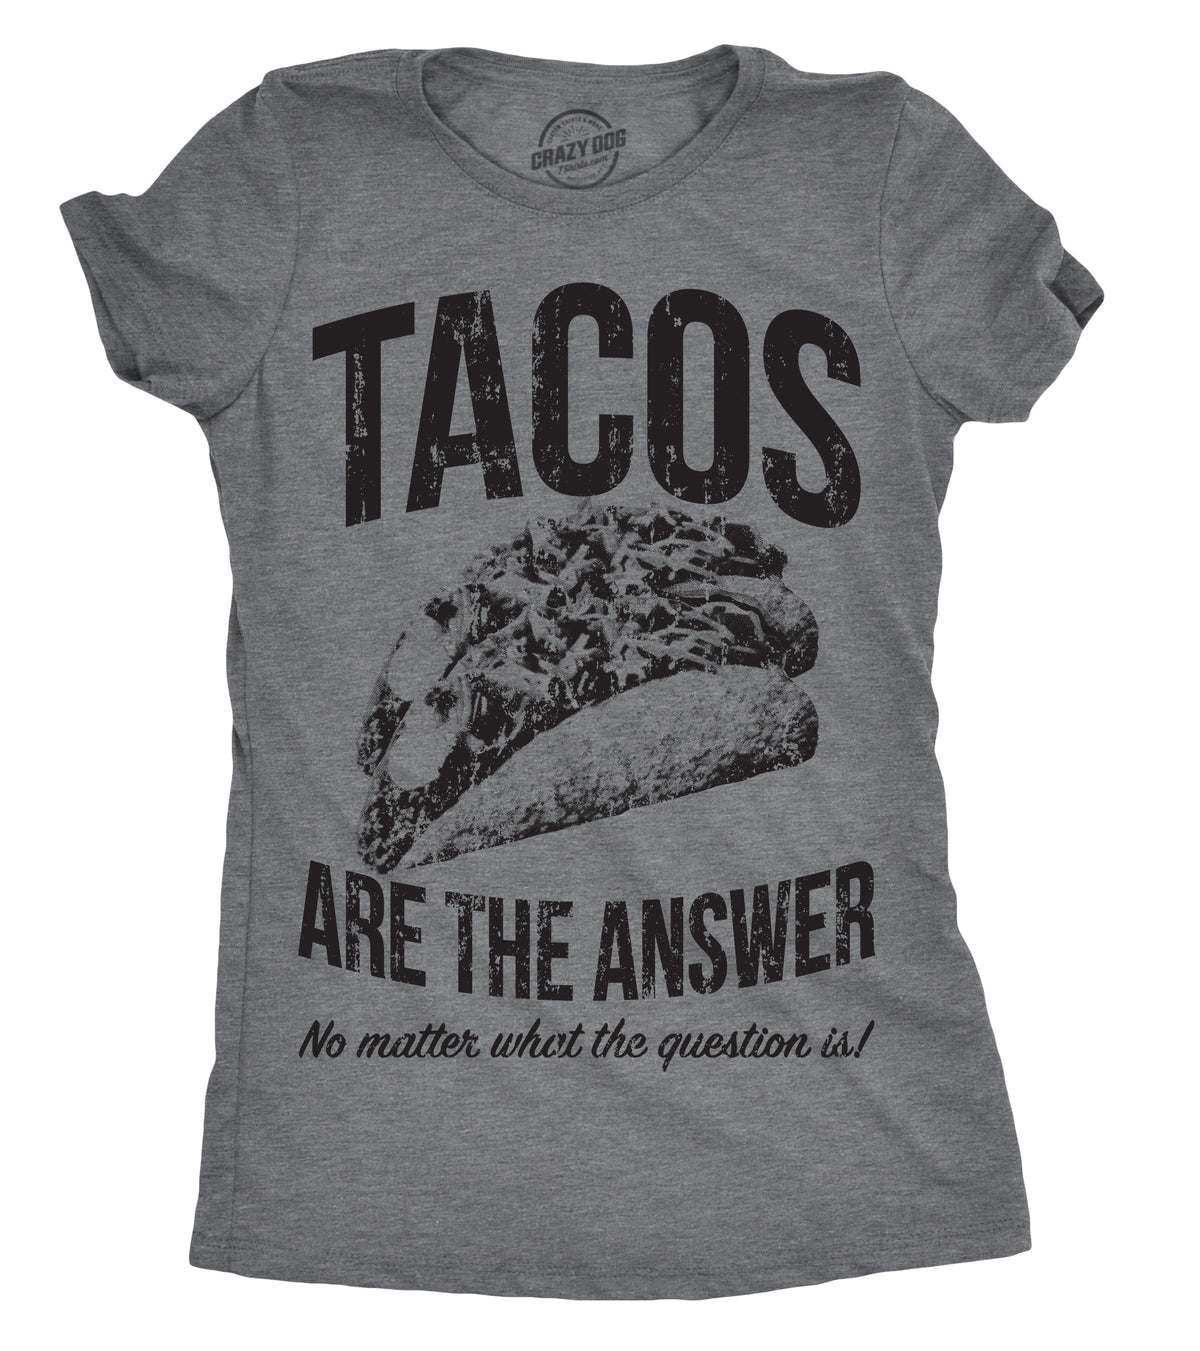 Funny Dark Heather Grey - Tacos Answer Tacos Are The Answer Womens T Shirt Nerdy Cinco De Mayo Food Sarcastic Tee